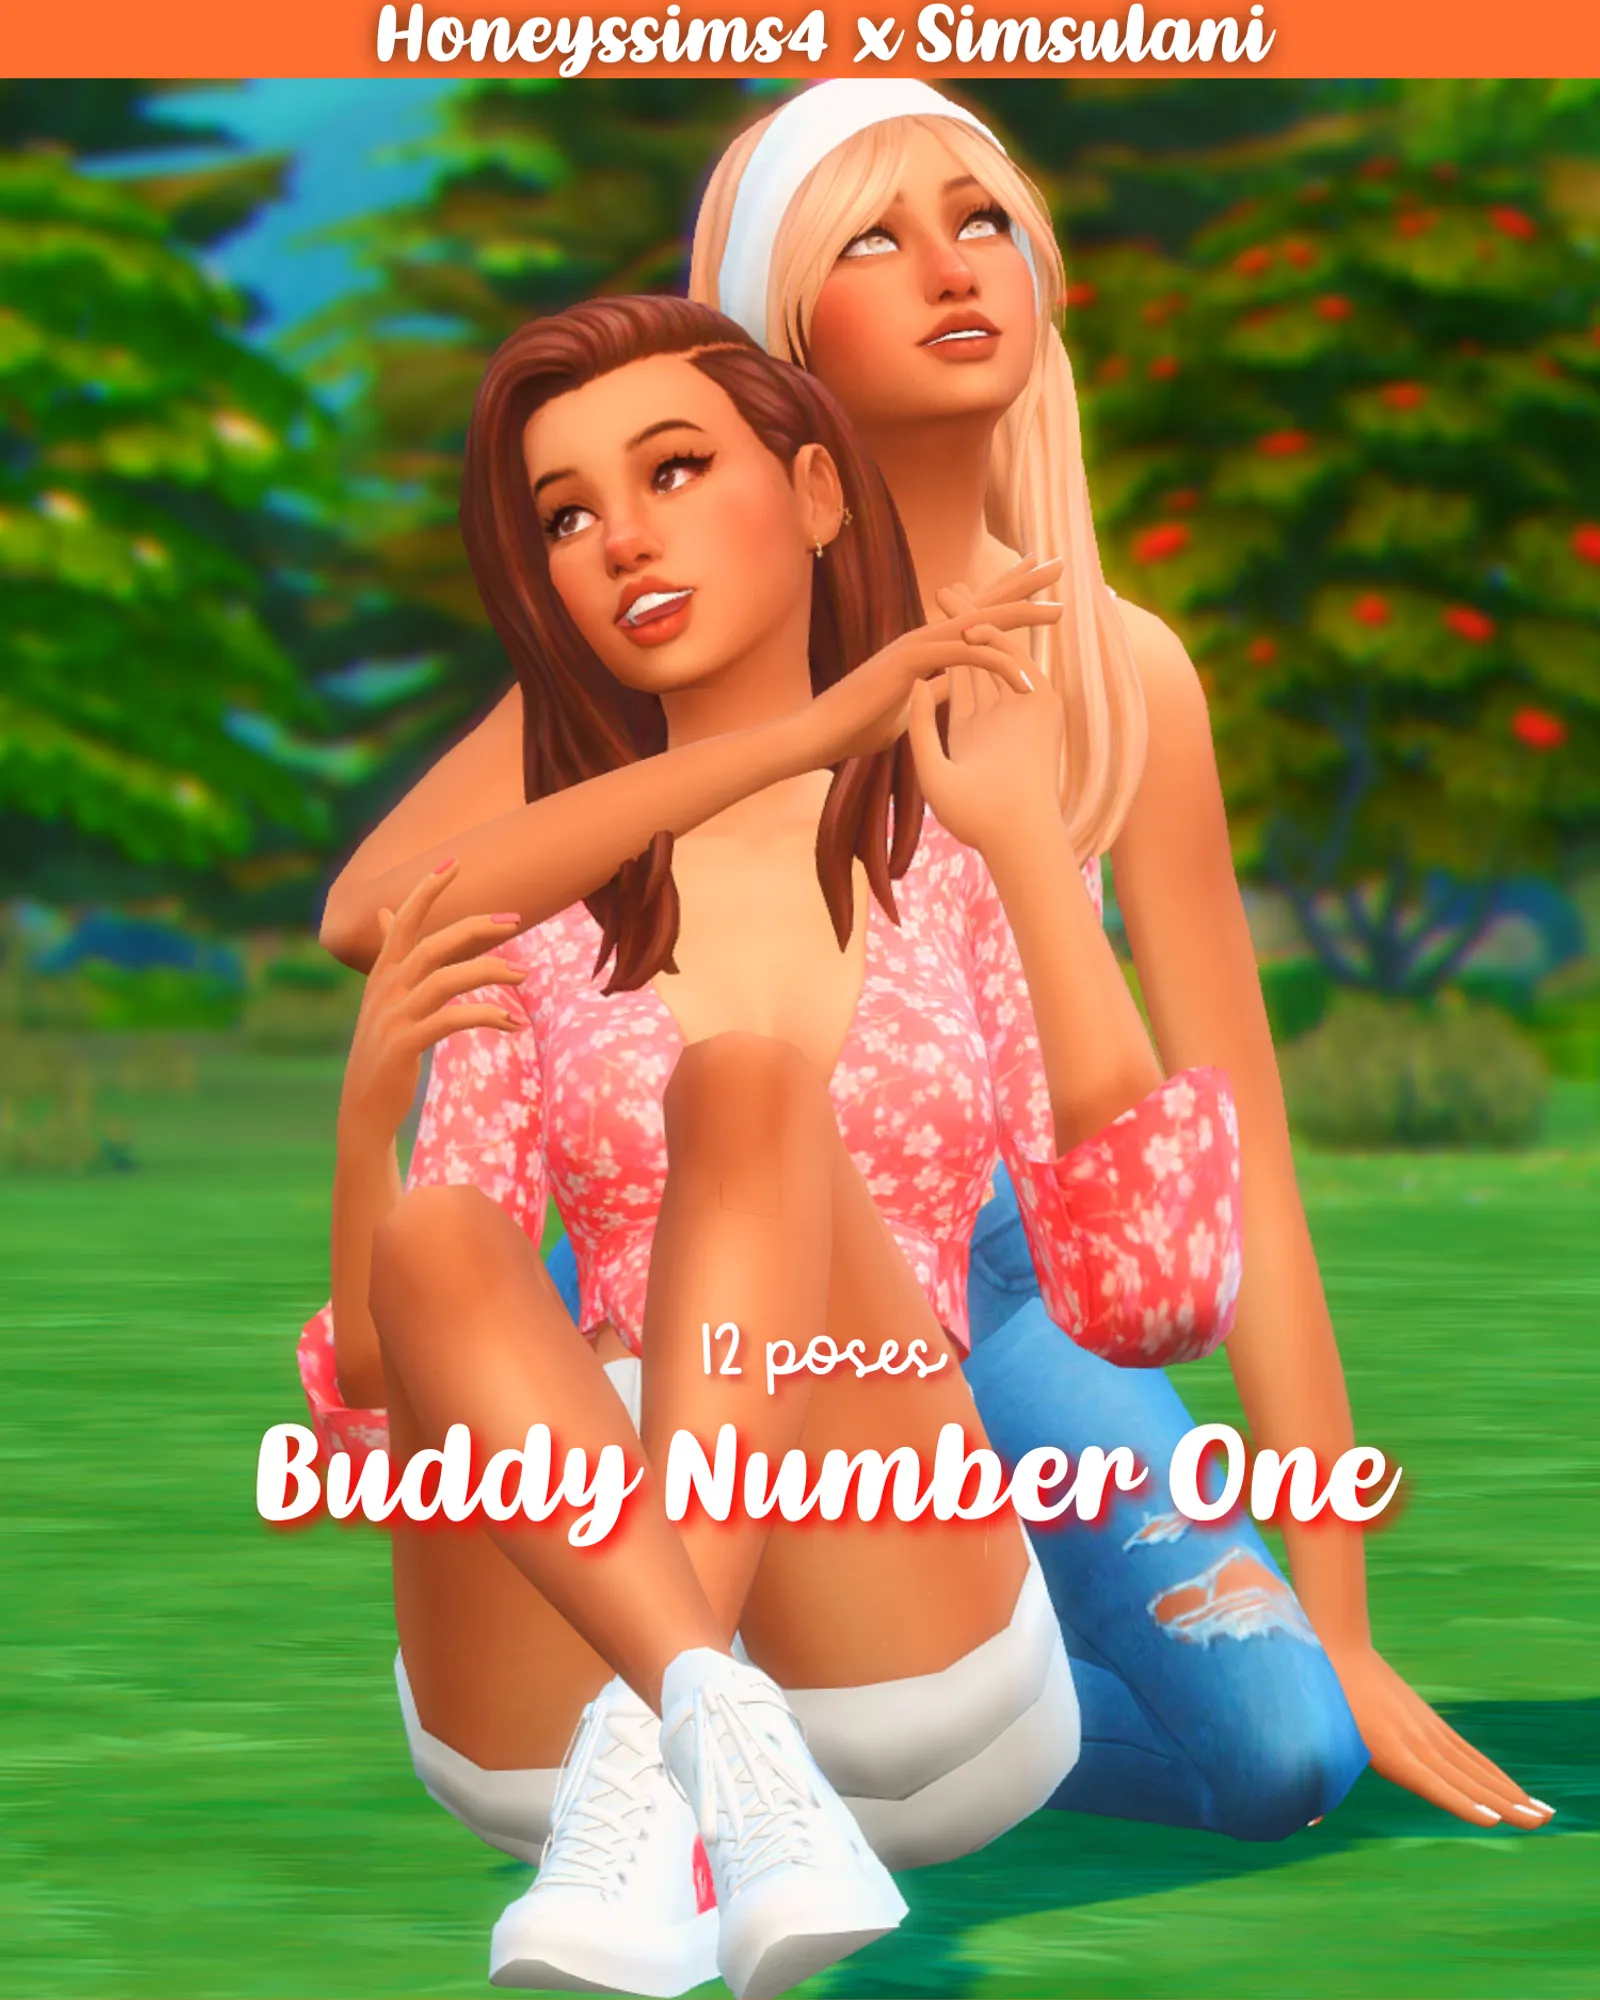 BUDDY NUMBER ONE - COLLAB WITH HS4 